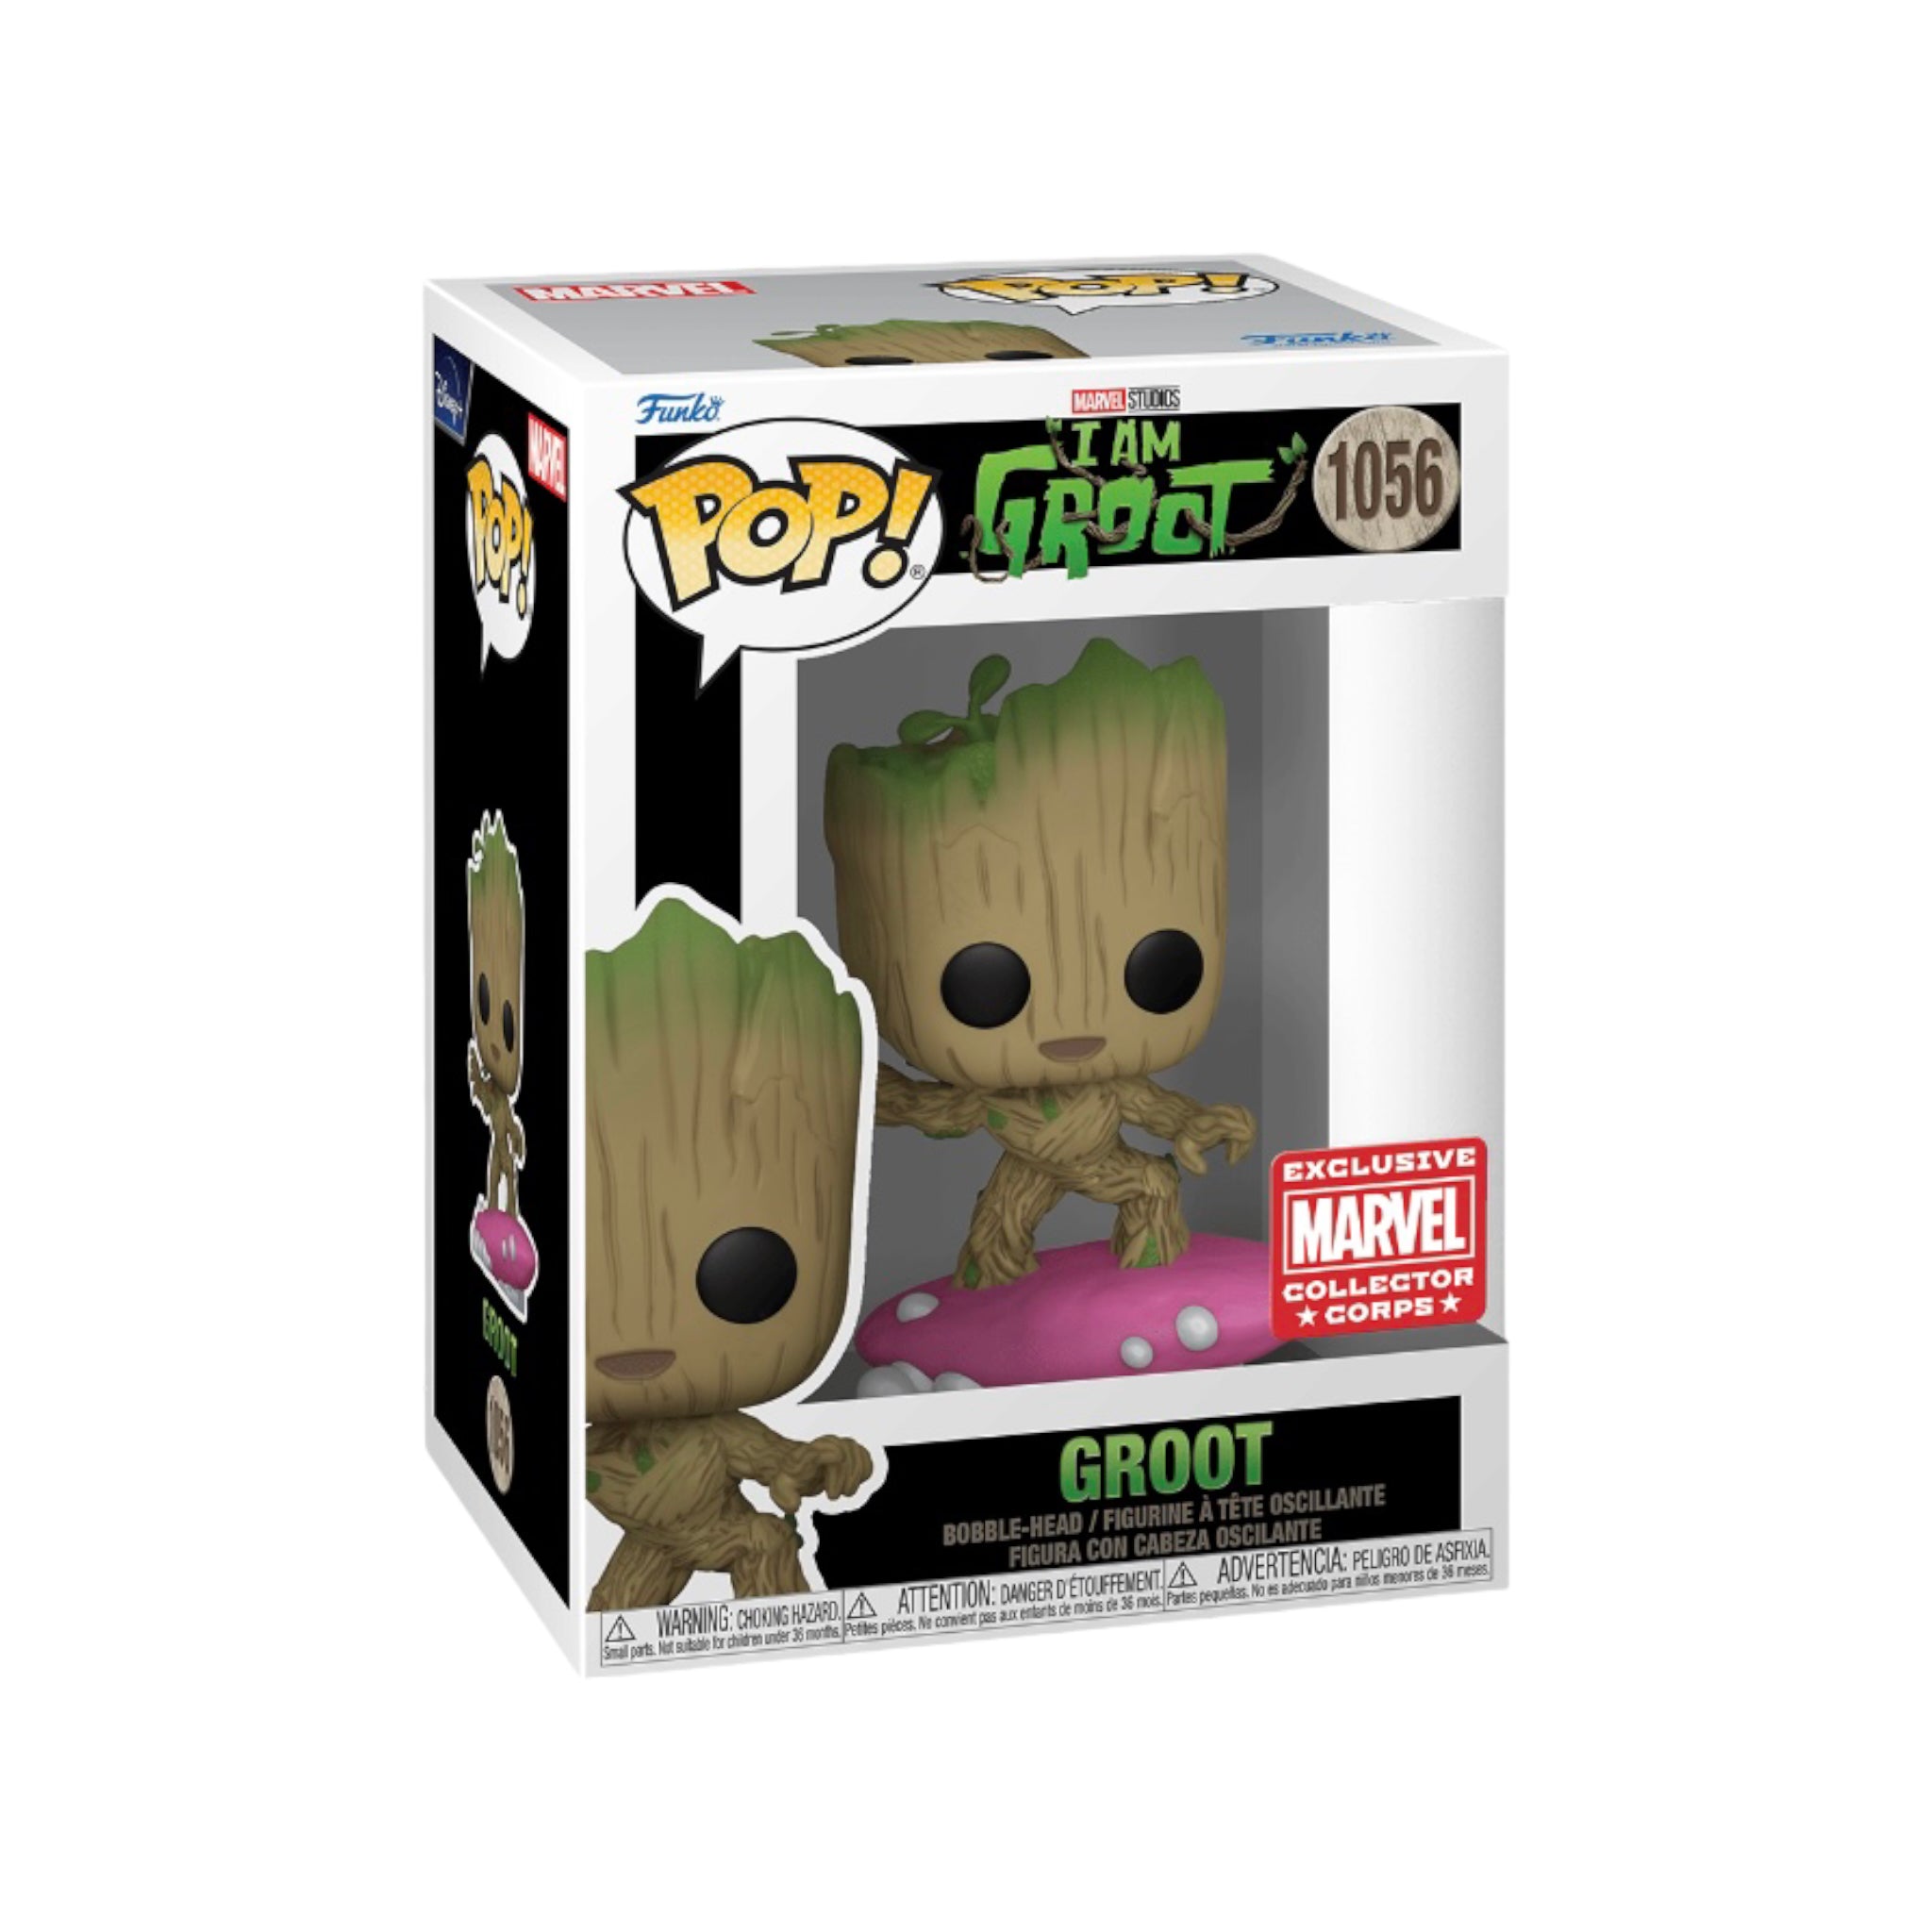 Groot #1056 (w/ Soap) Funko Pop! - I Am Groot - Marvel Collector Corps Exclusive